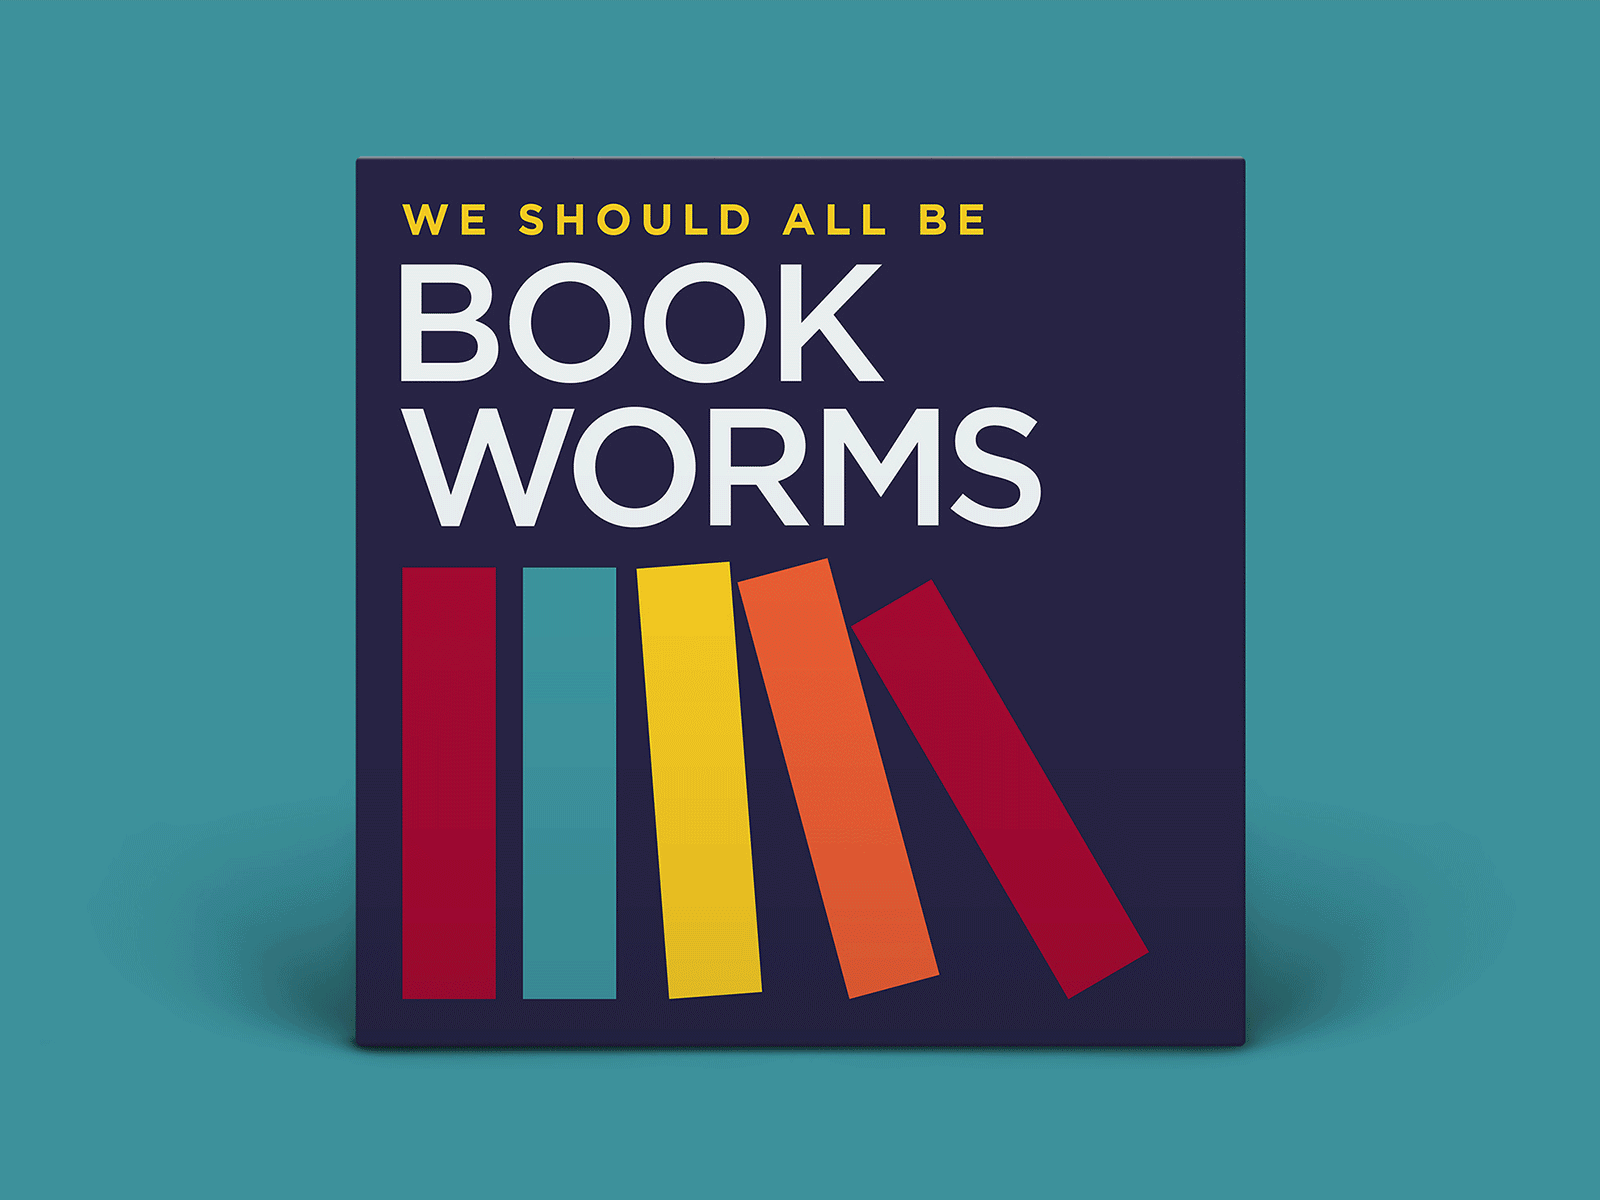 We Should All Be Bookworms — Third Draft by Art for Audio on Dribbble